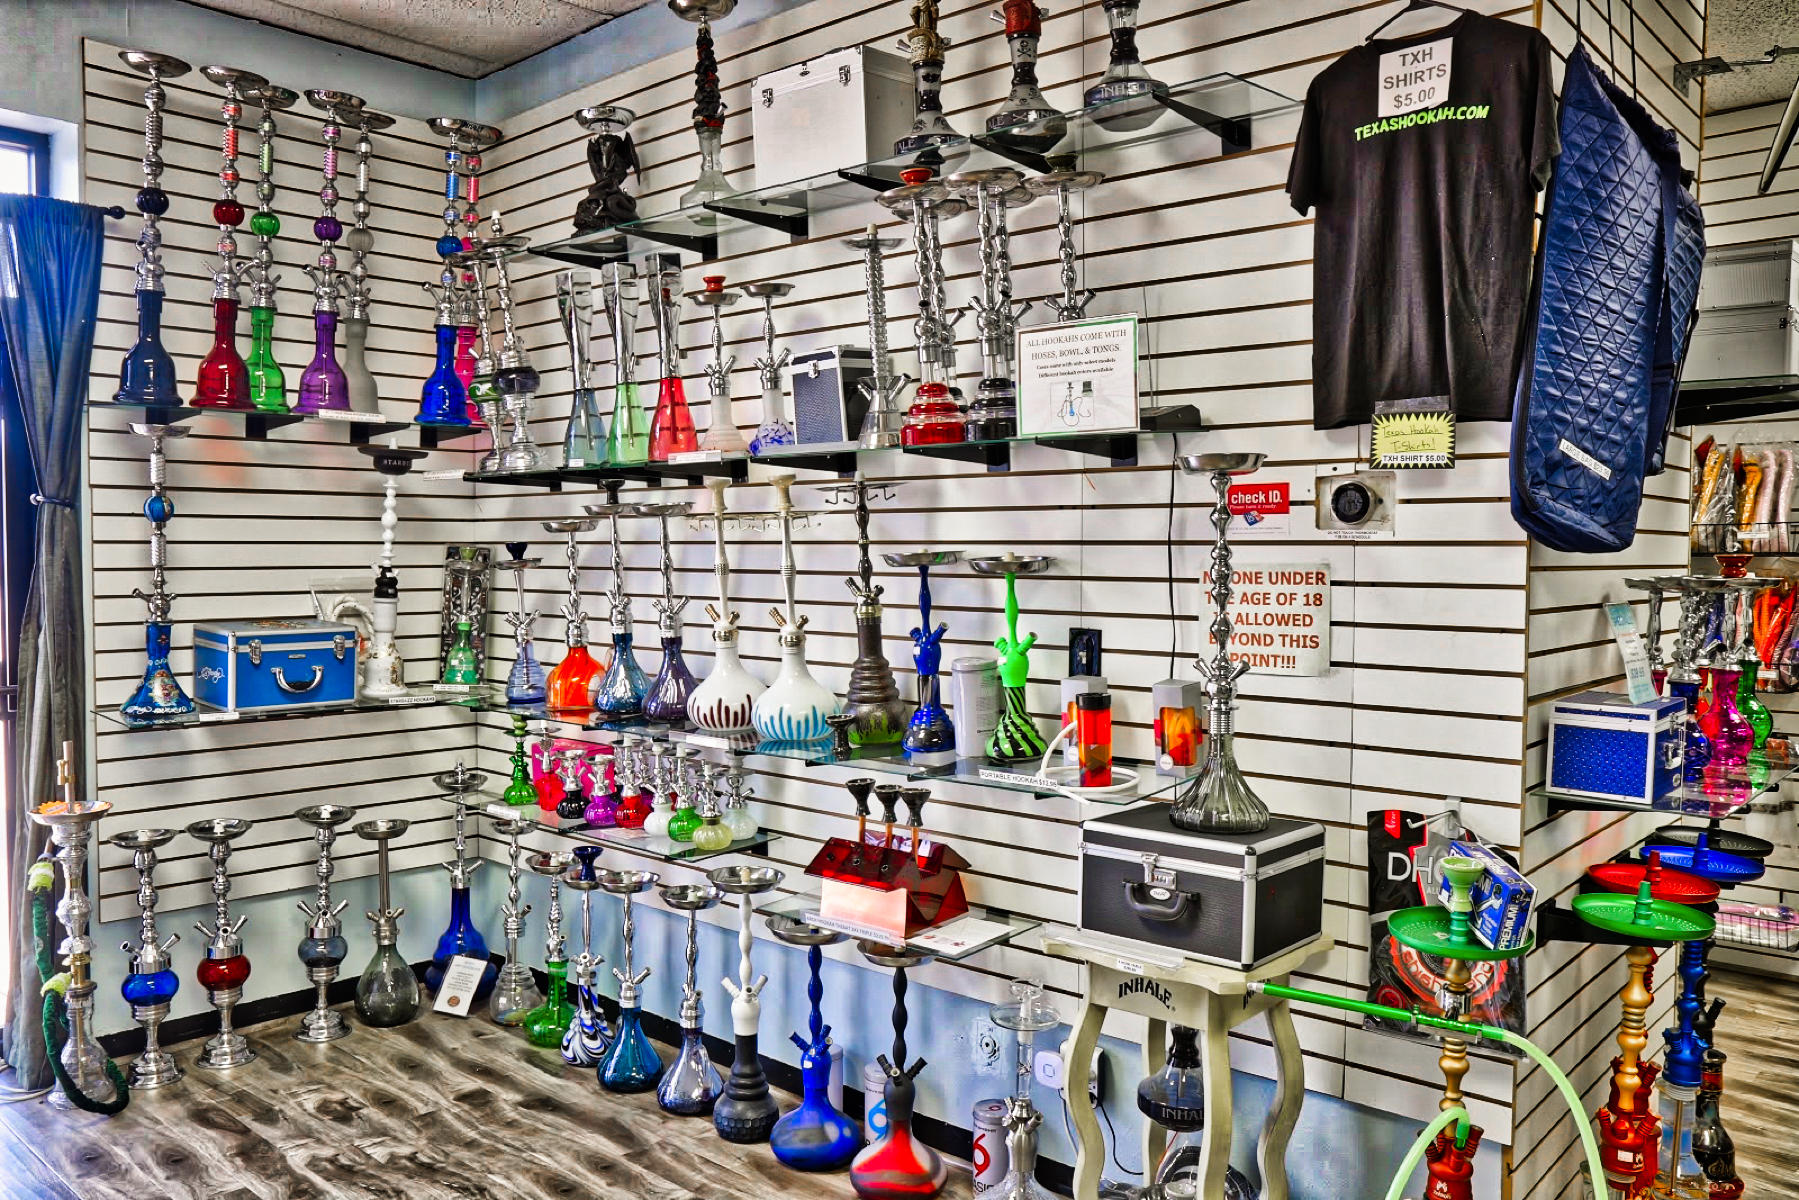 Get directions, reviews and information for Texas Hookah Store in Houston, ...